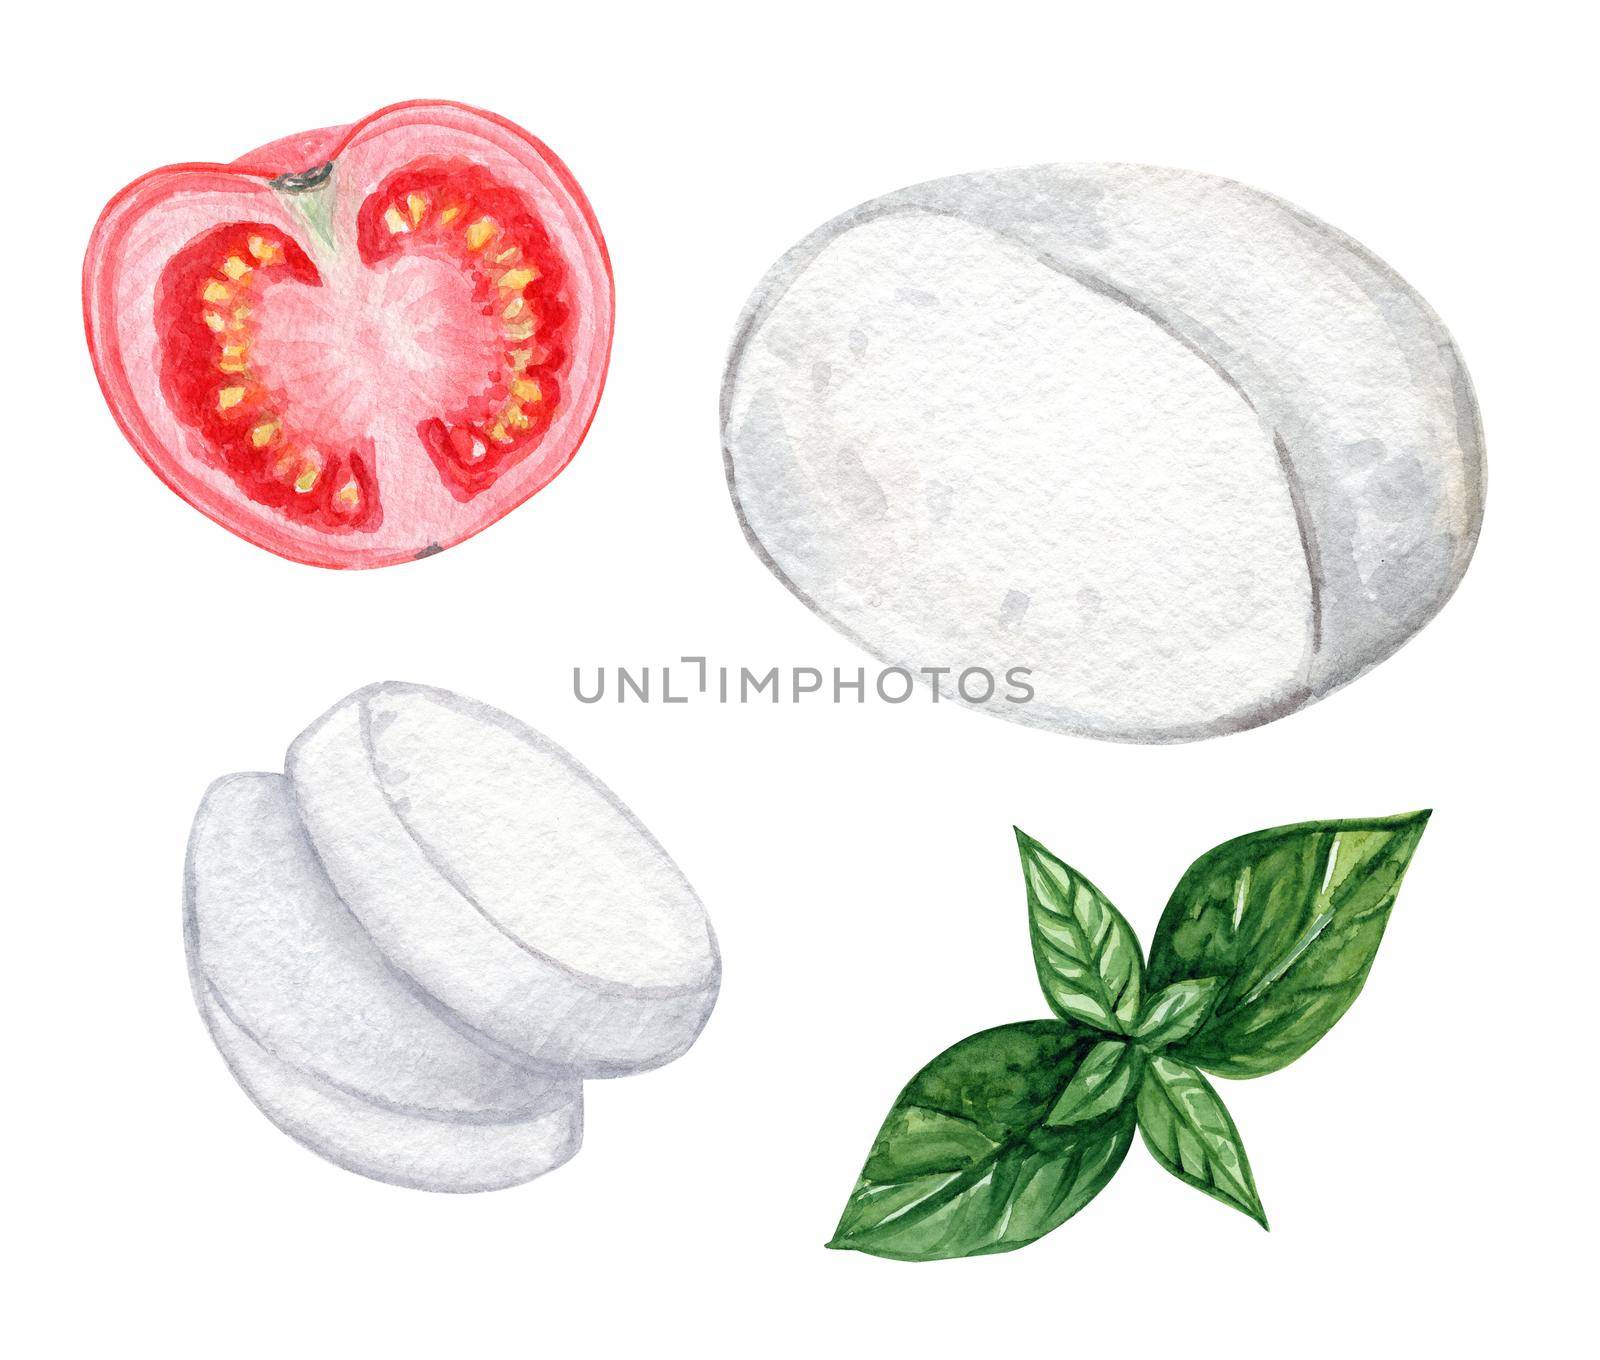 Watercolor caprese ingredients set isolated on white background. Tomato, basil and mozzarella cheese hand drawn illustration. Italian food recipe